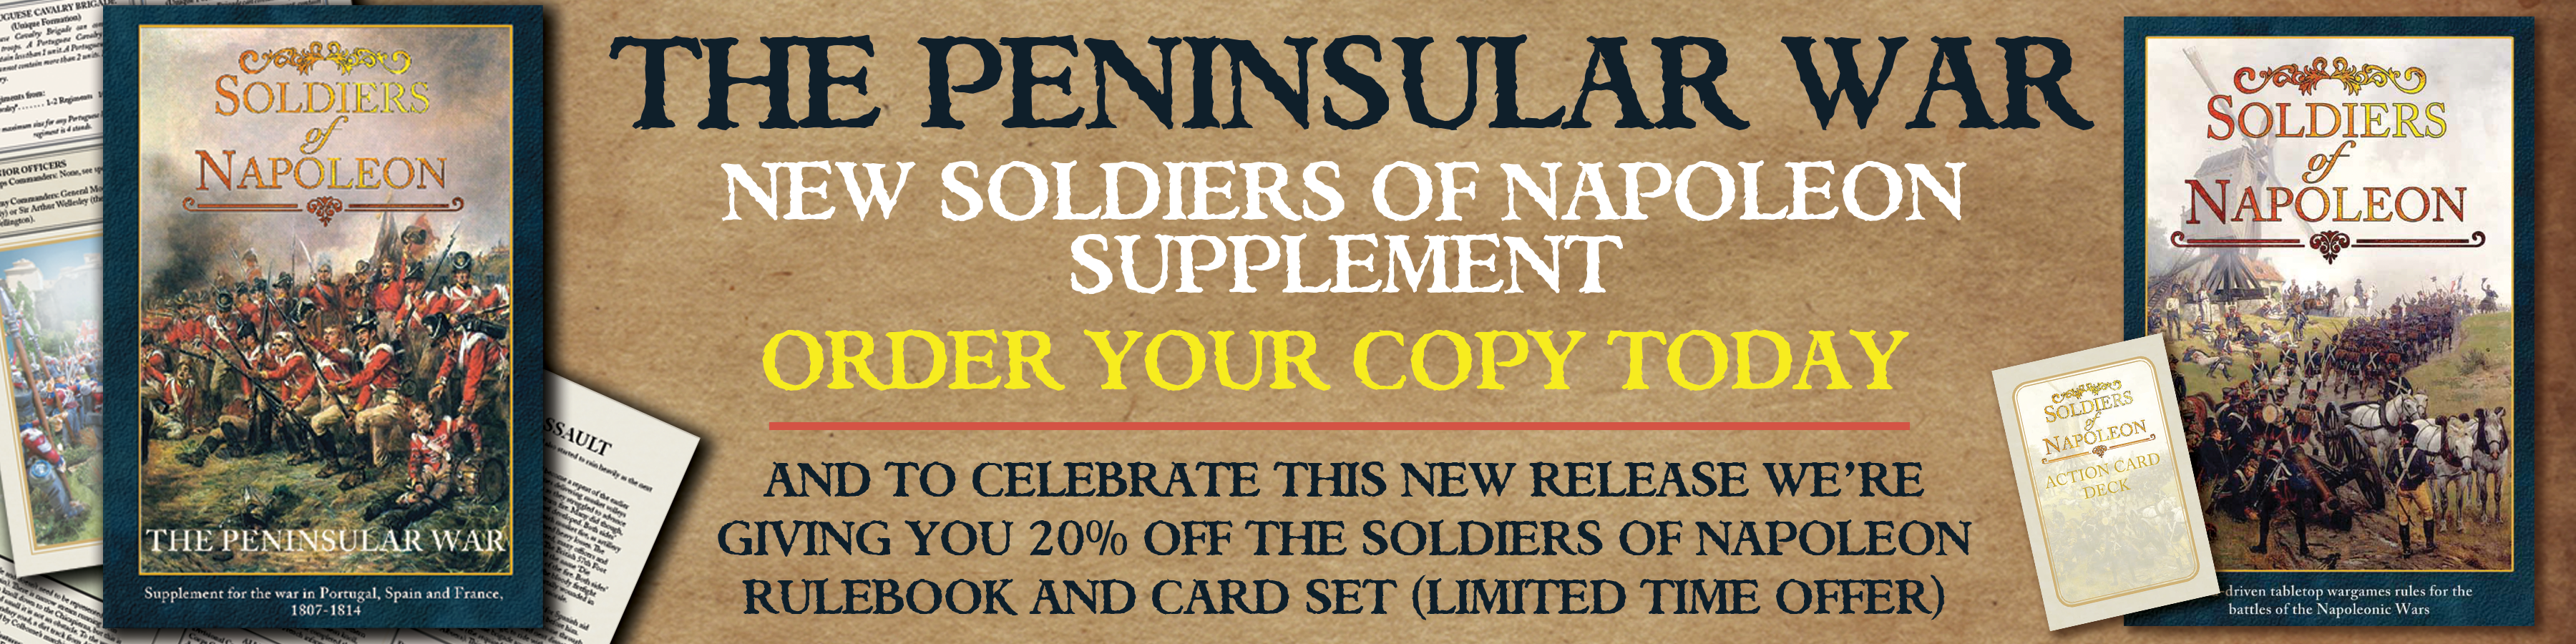 The Peninsula War - Soldiers of Napoleon Supplement